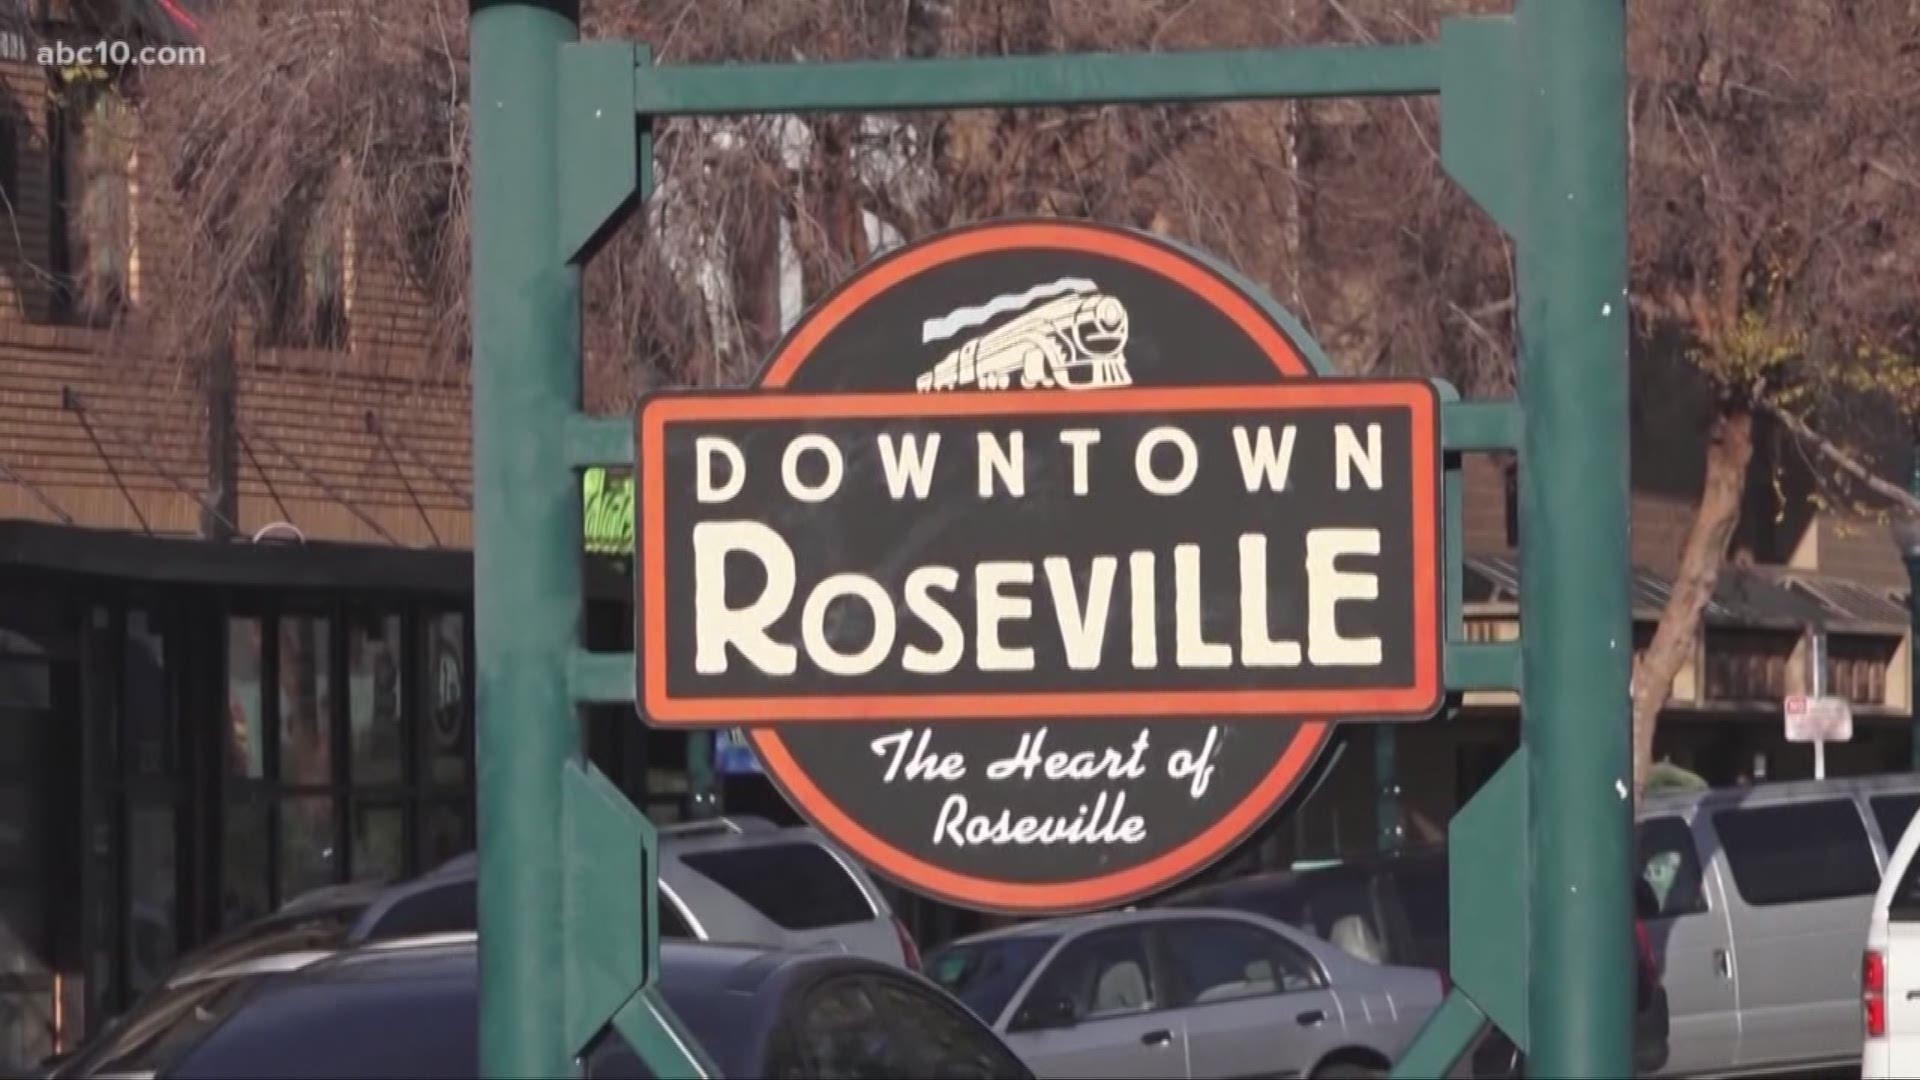 Roseville city leaders are doing their best to keep local businesses and community members engaged as everyone looks for ways to ride out the coronavirus pandemic.